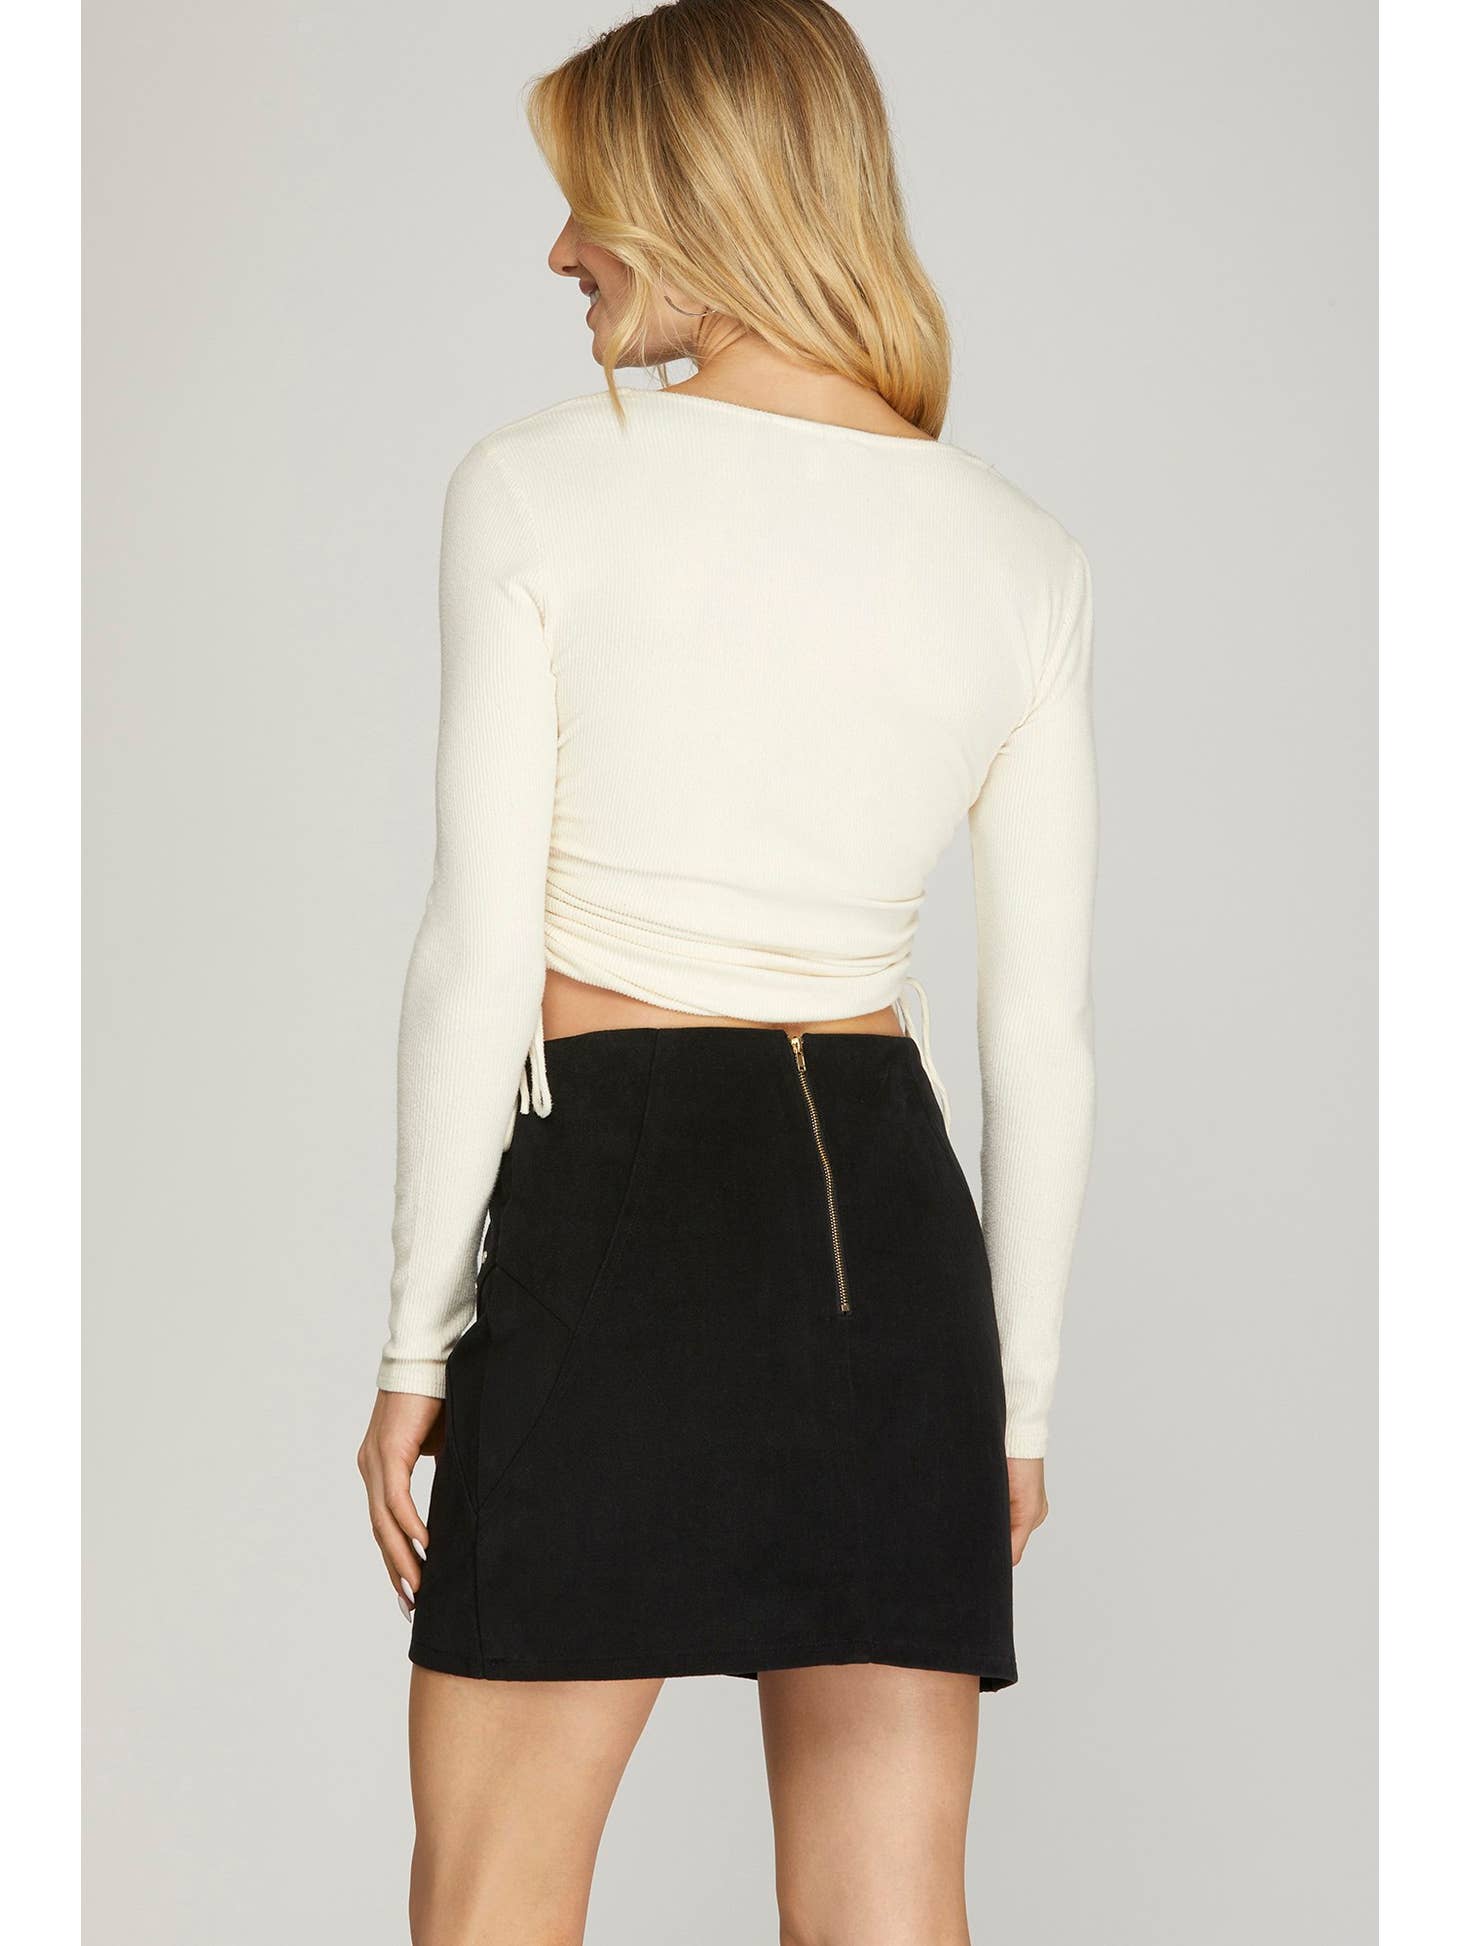 Black mini skirt with stud detail, REBELRY BOUTIQUE, Arvada, CO